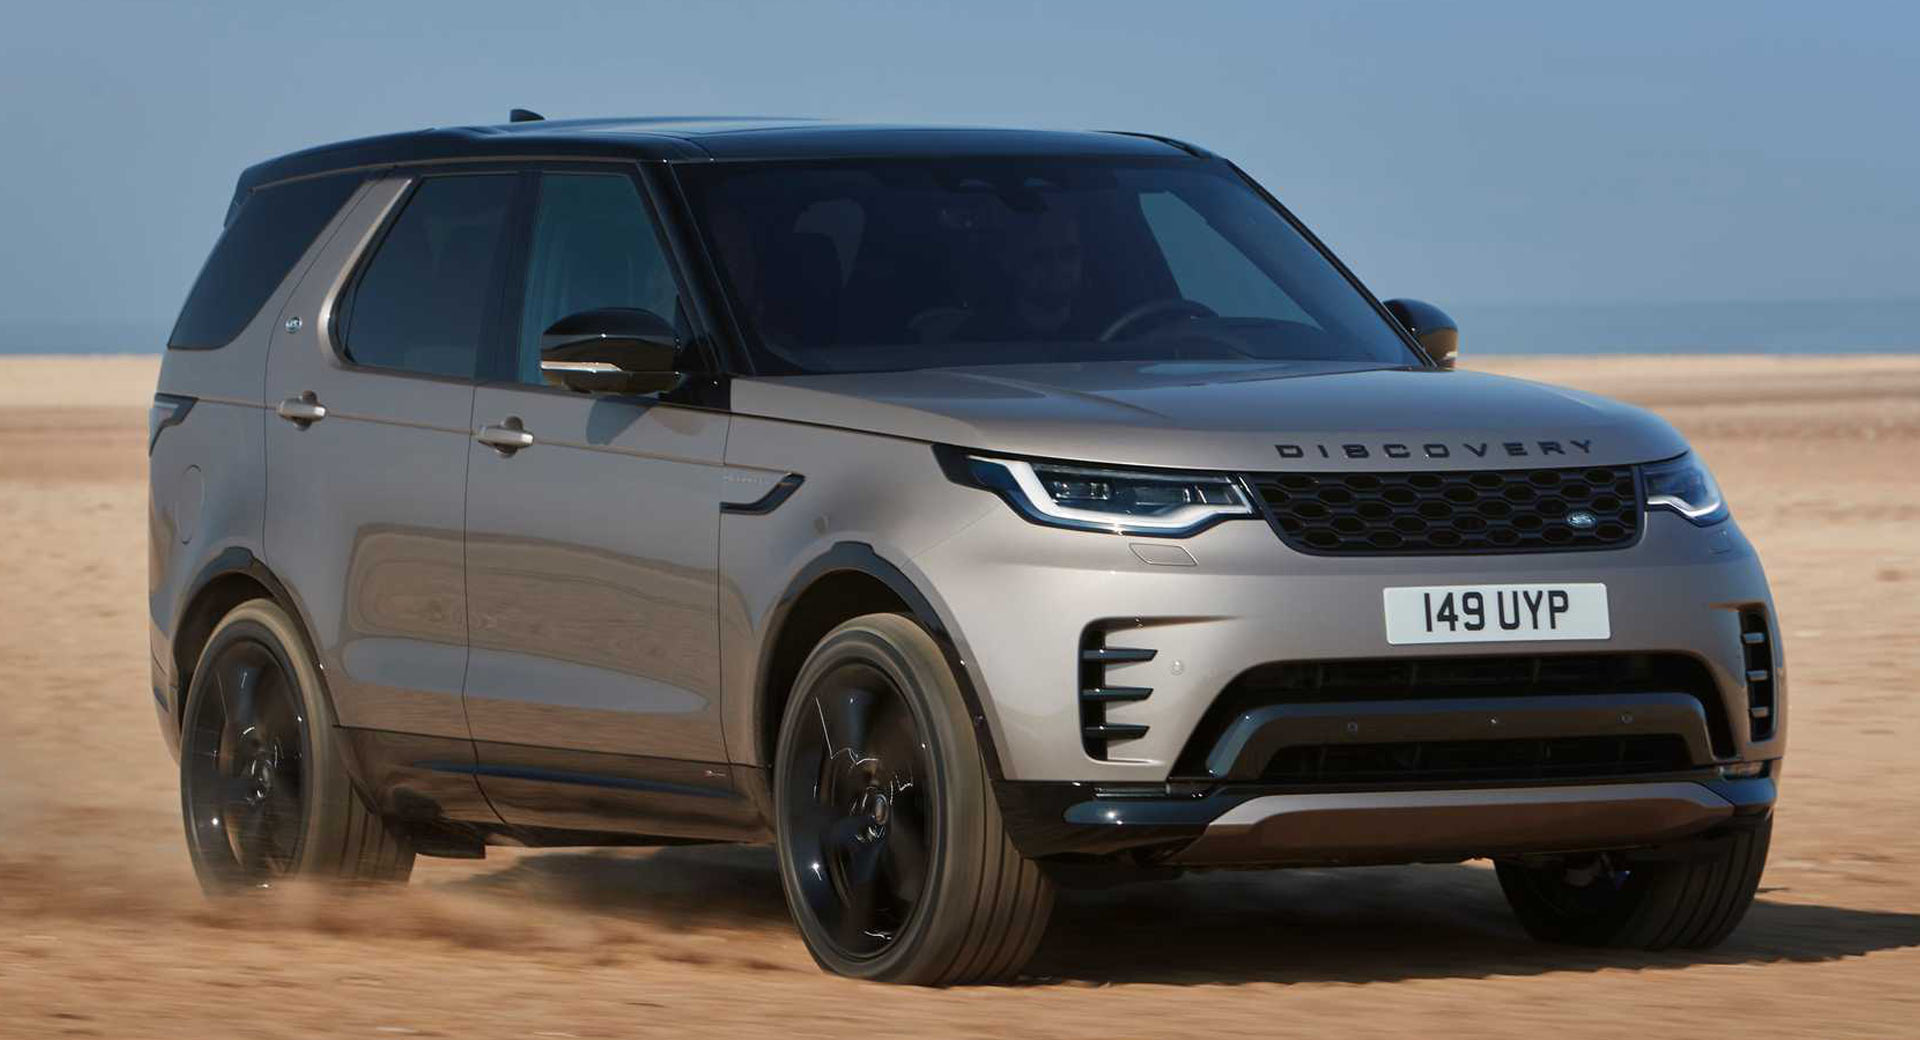 2018 Land Rover Discovery MPG, Price, Reviews & Photos 